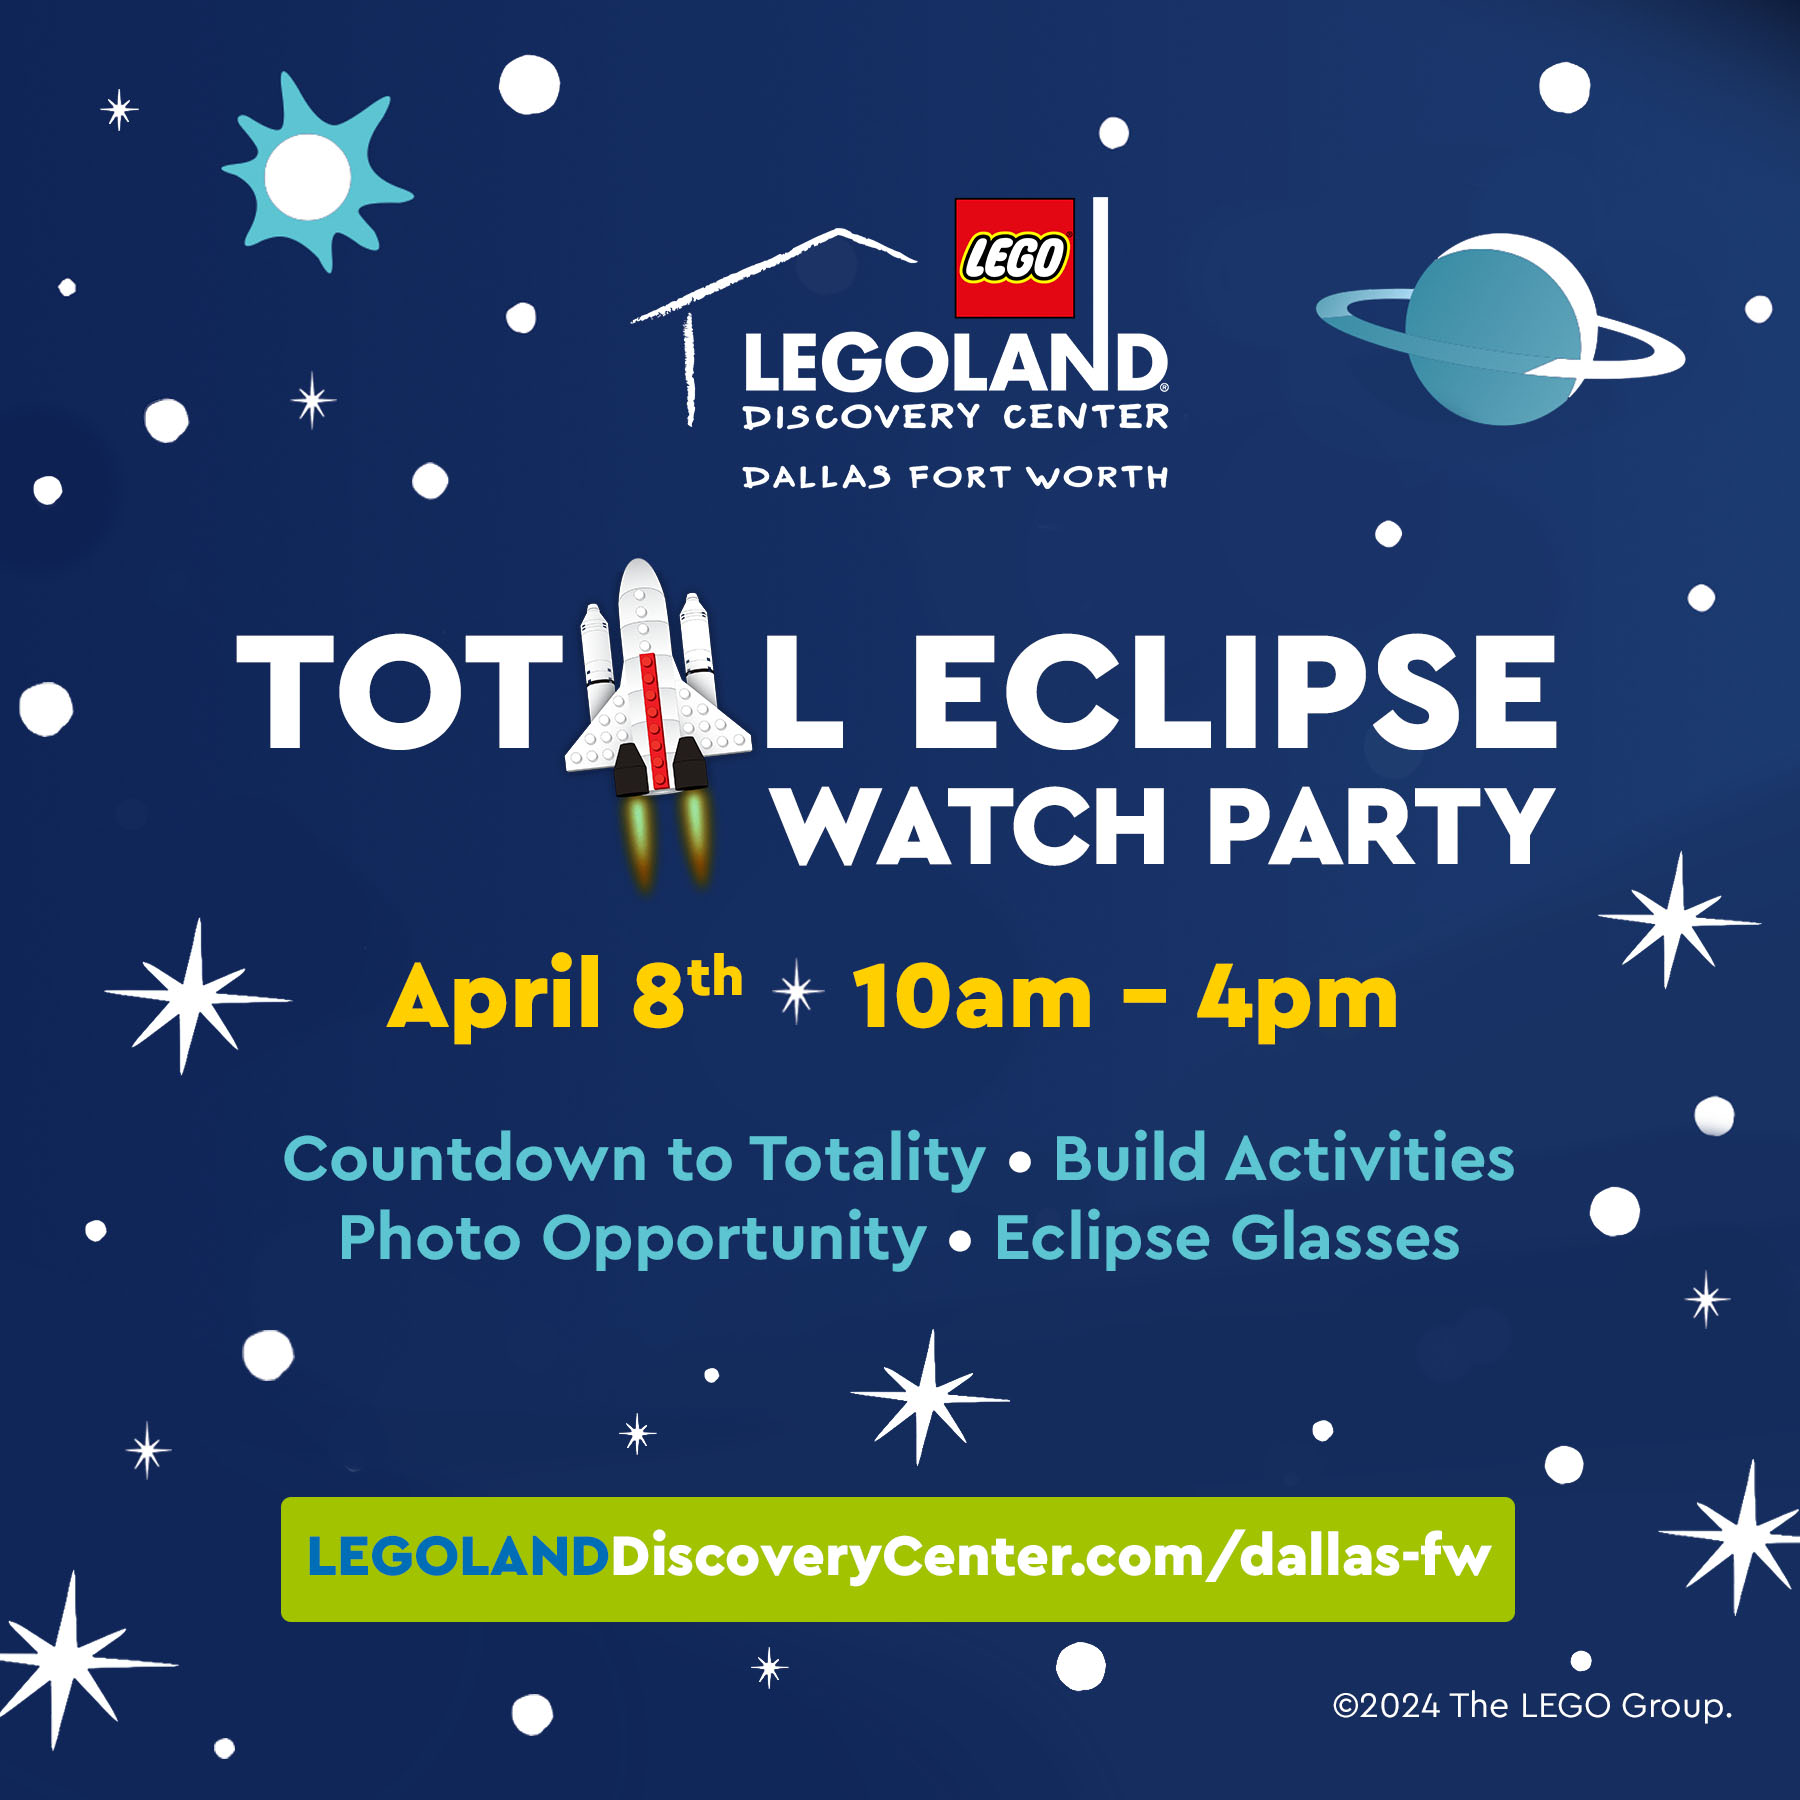 2024 LDCD Totaleclipsewatchparty Square